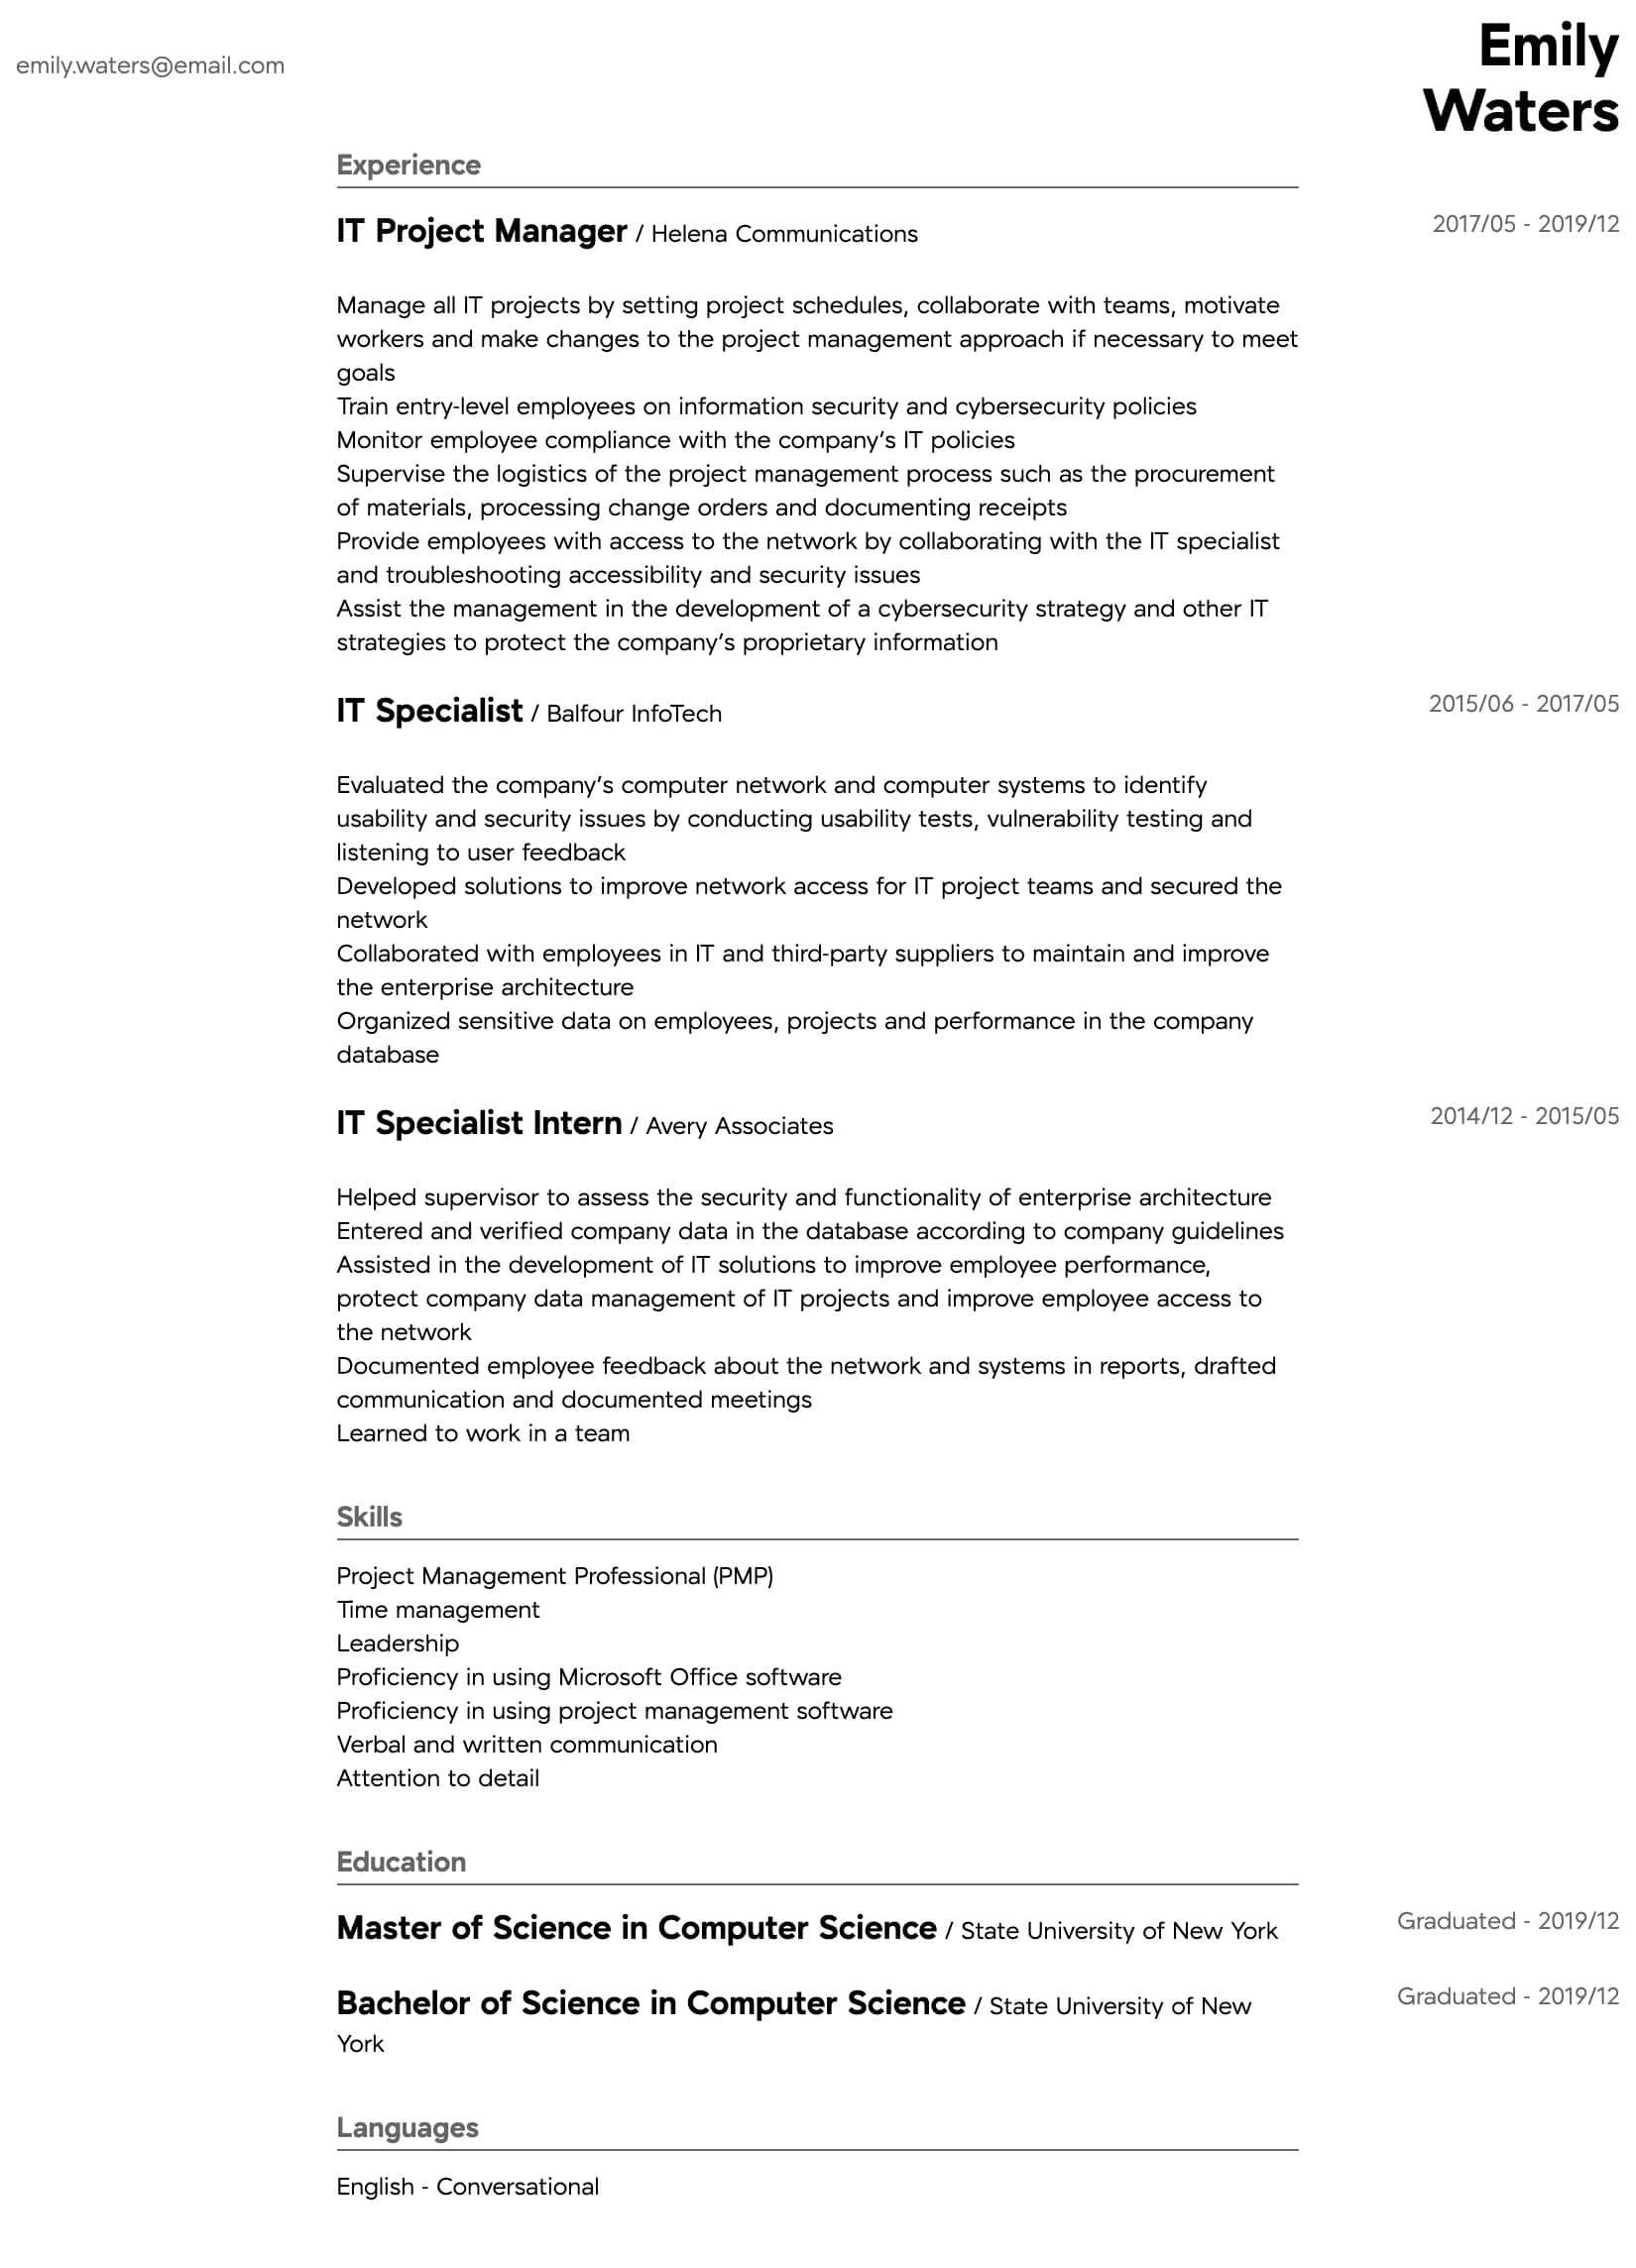 Networking Qa Expirence Sample Resume Indeed It Project Manager Resume Samples All Experience Levels Resume …